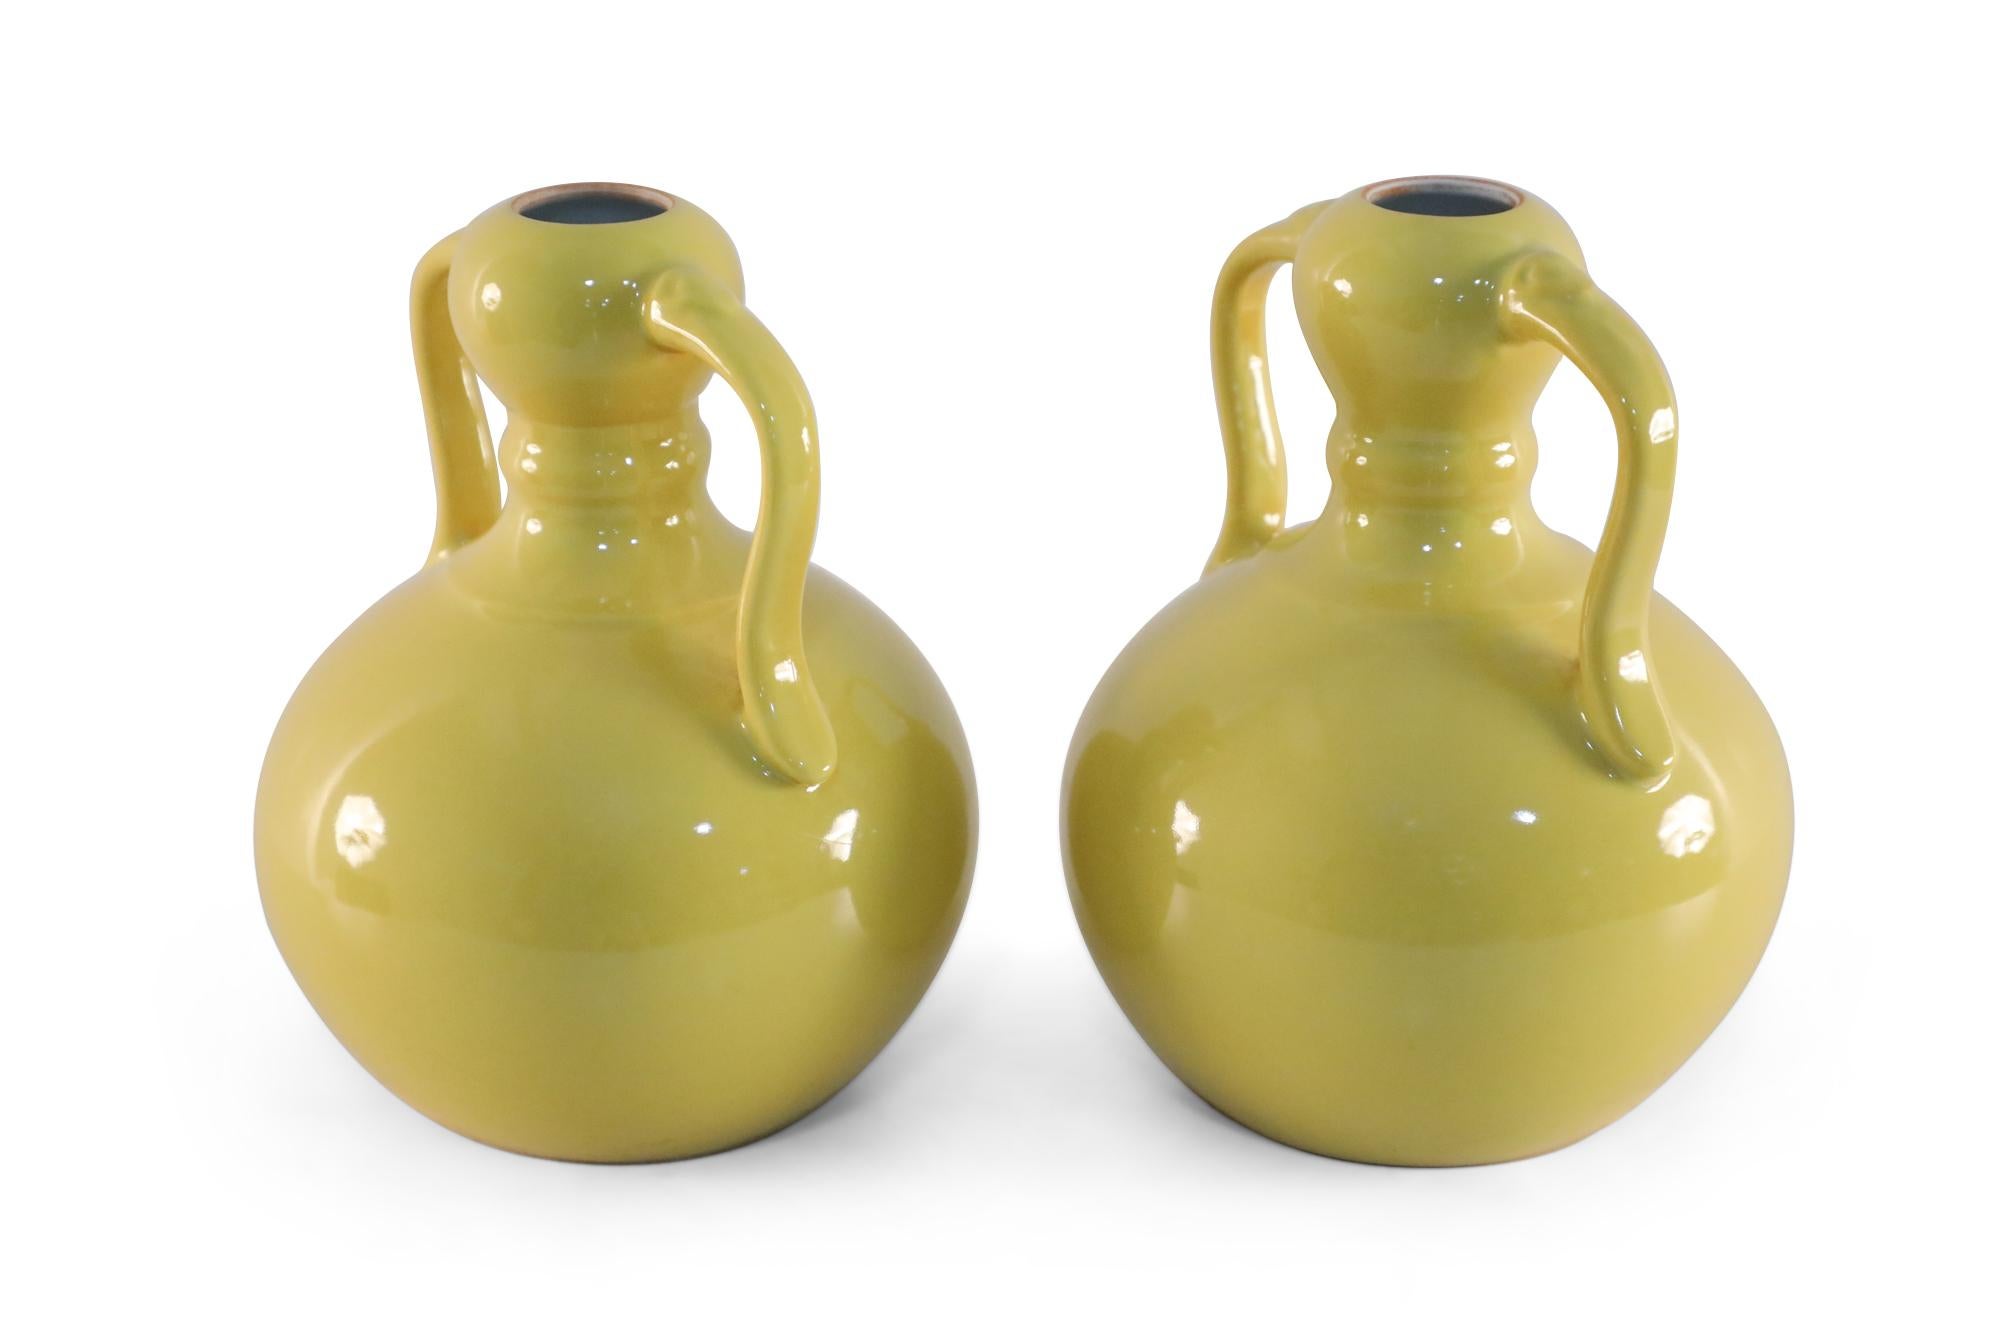 Pair of Antique Chinese (Late 19th Century) yellow porcelain vases with gourd forms and handles (date mark on bottom, see photos).